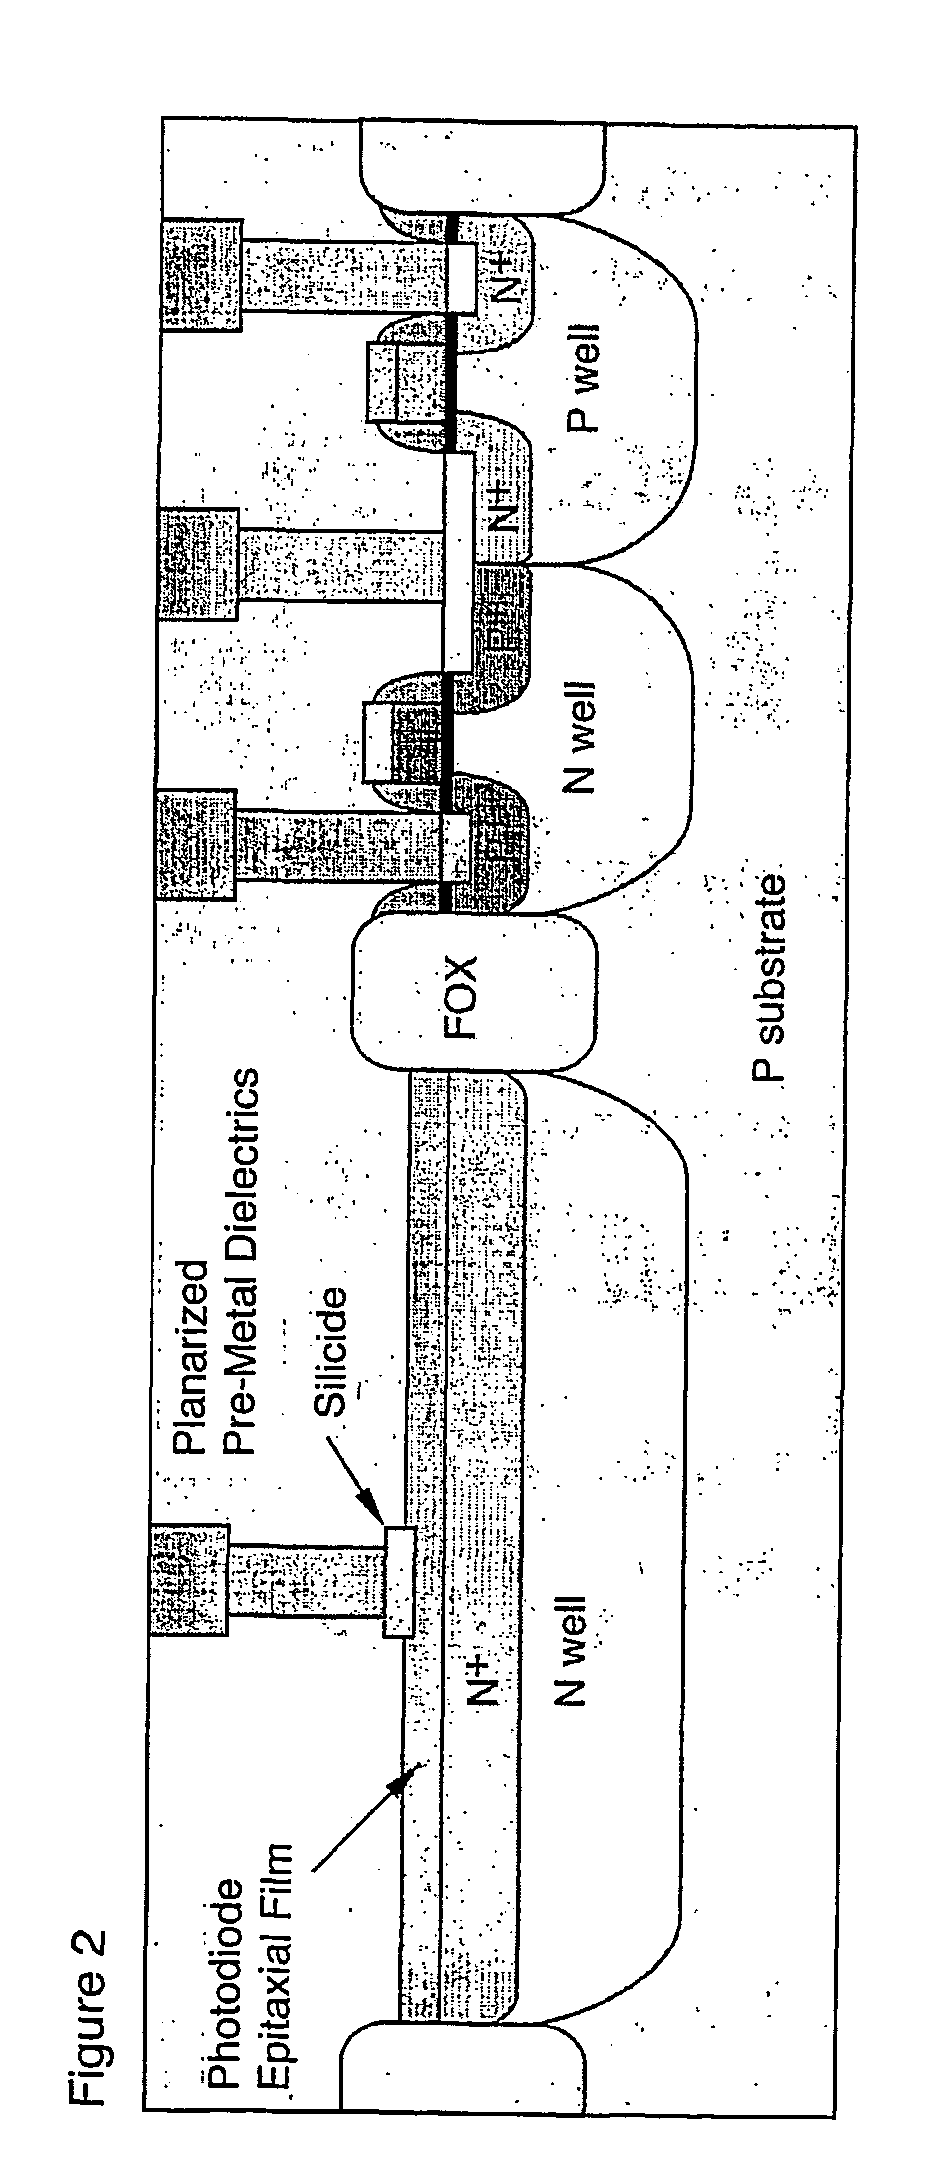 Method of fabricating heterojunction photodiodes integrated with cmos